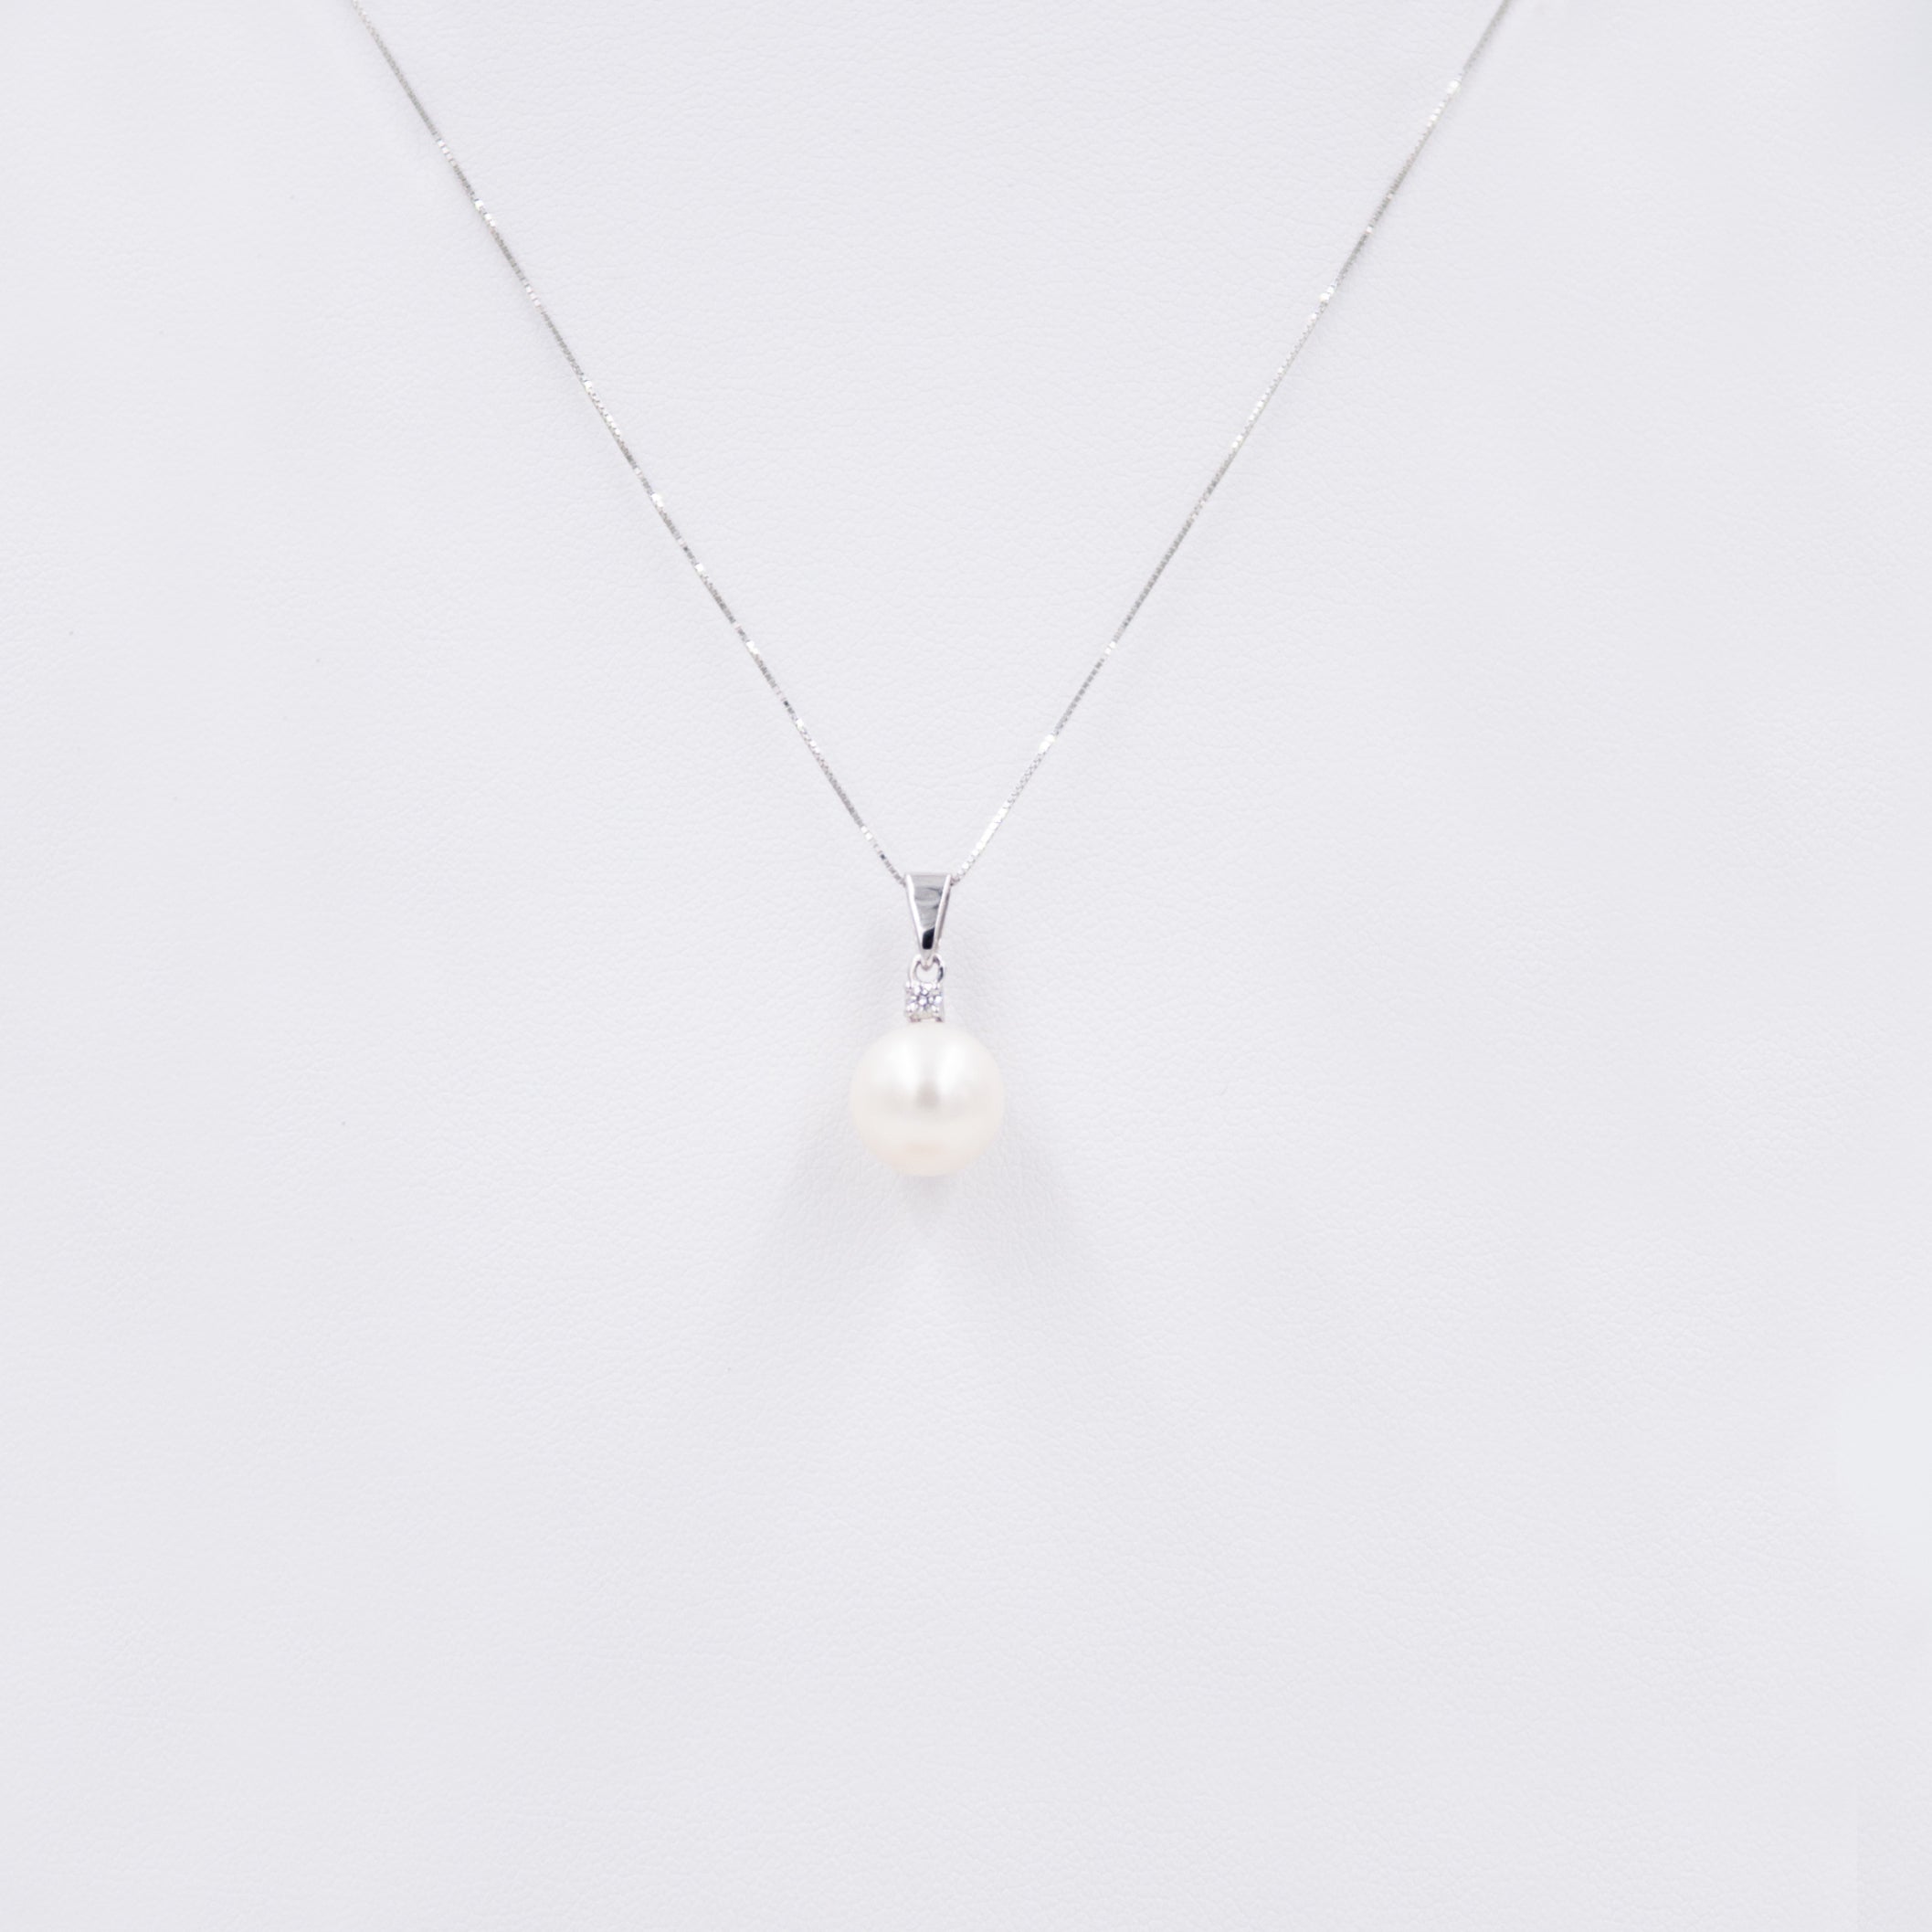 Necklace with central Pearl 7mm and Diamond